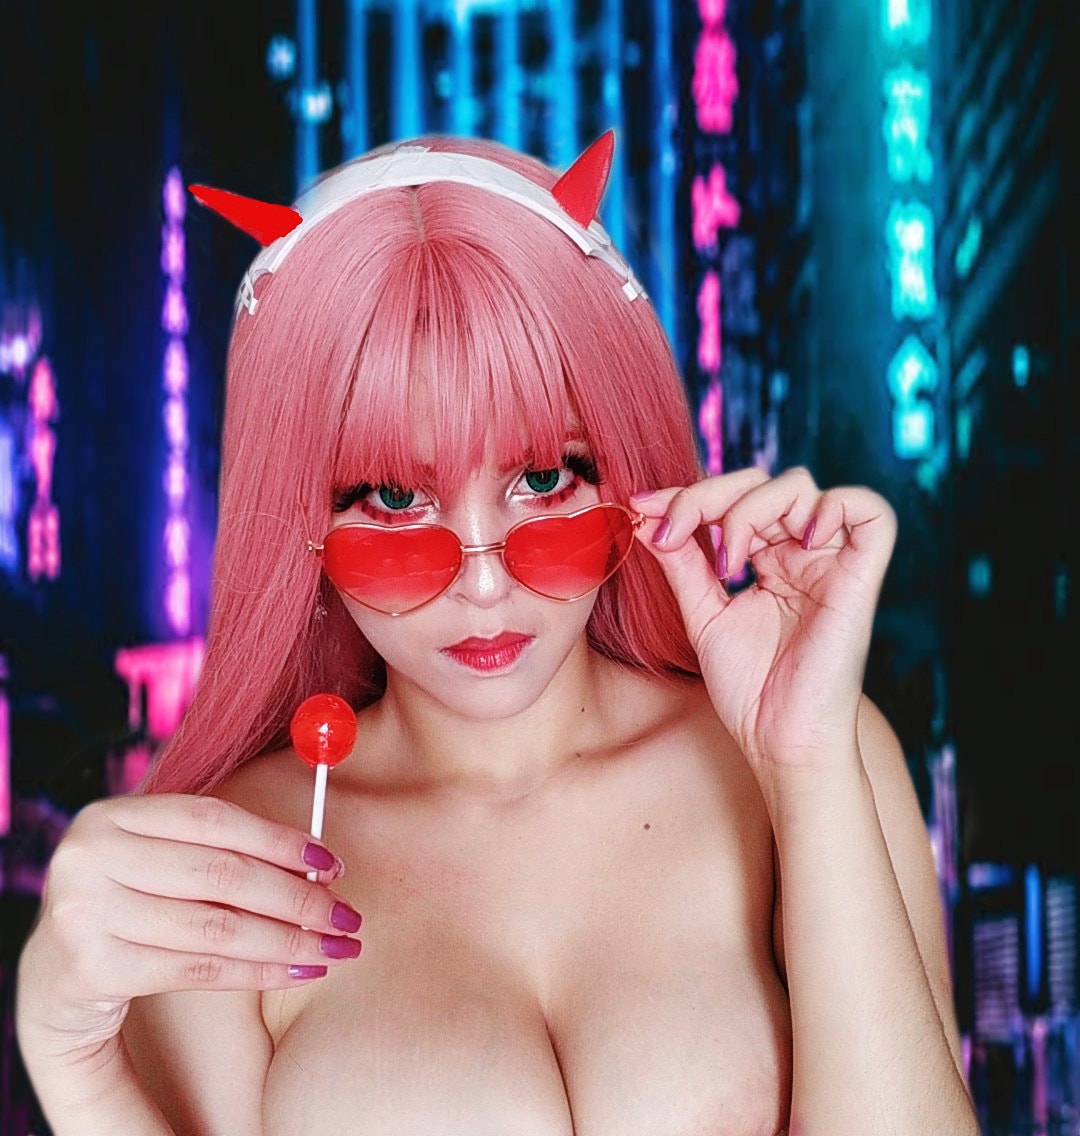 Zero Two From Darling In The Franxx By Juliachans